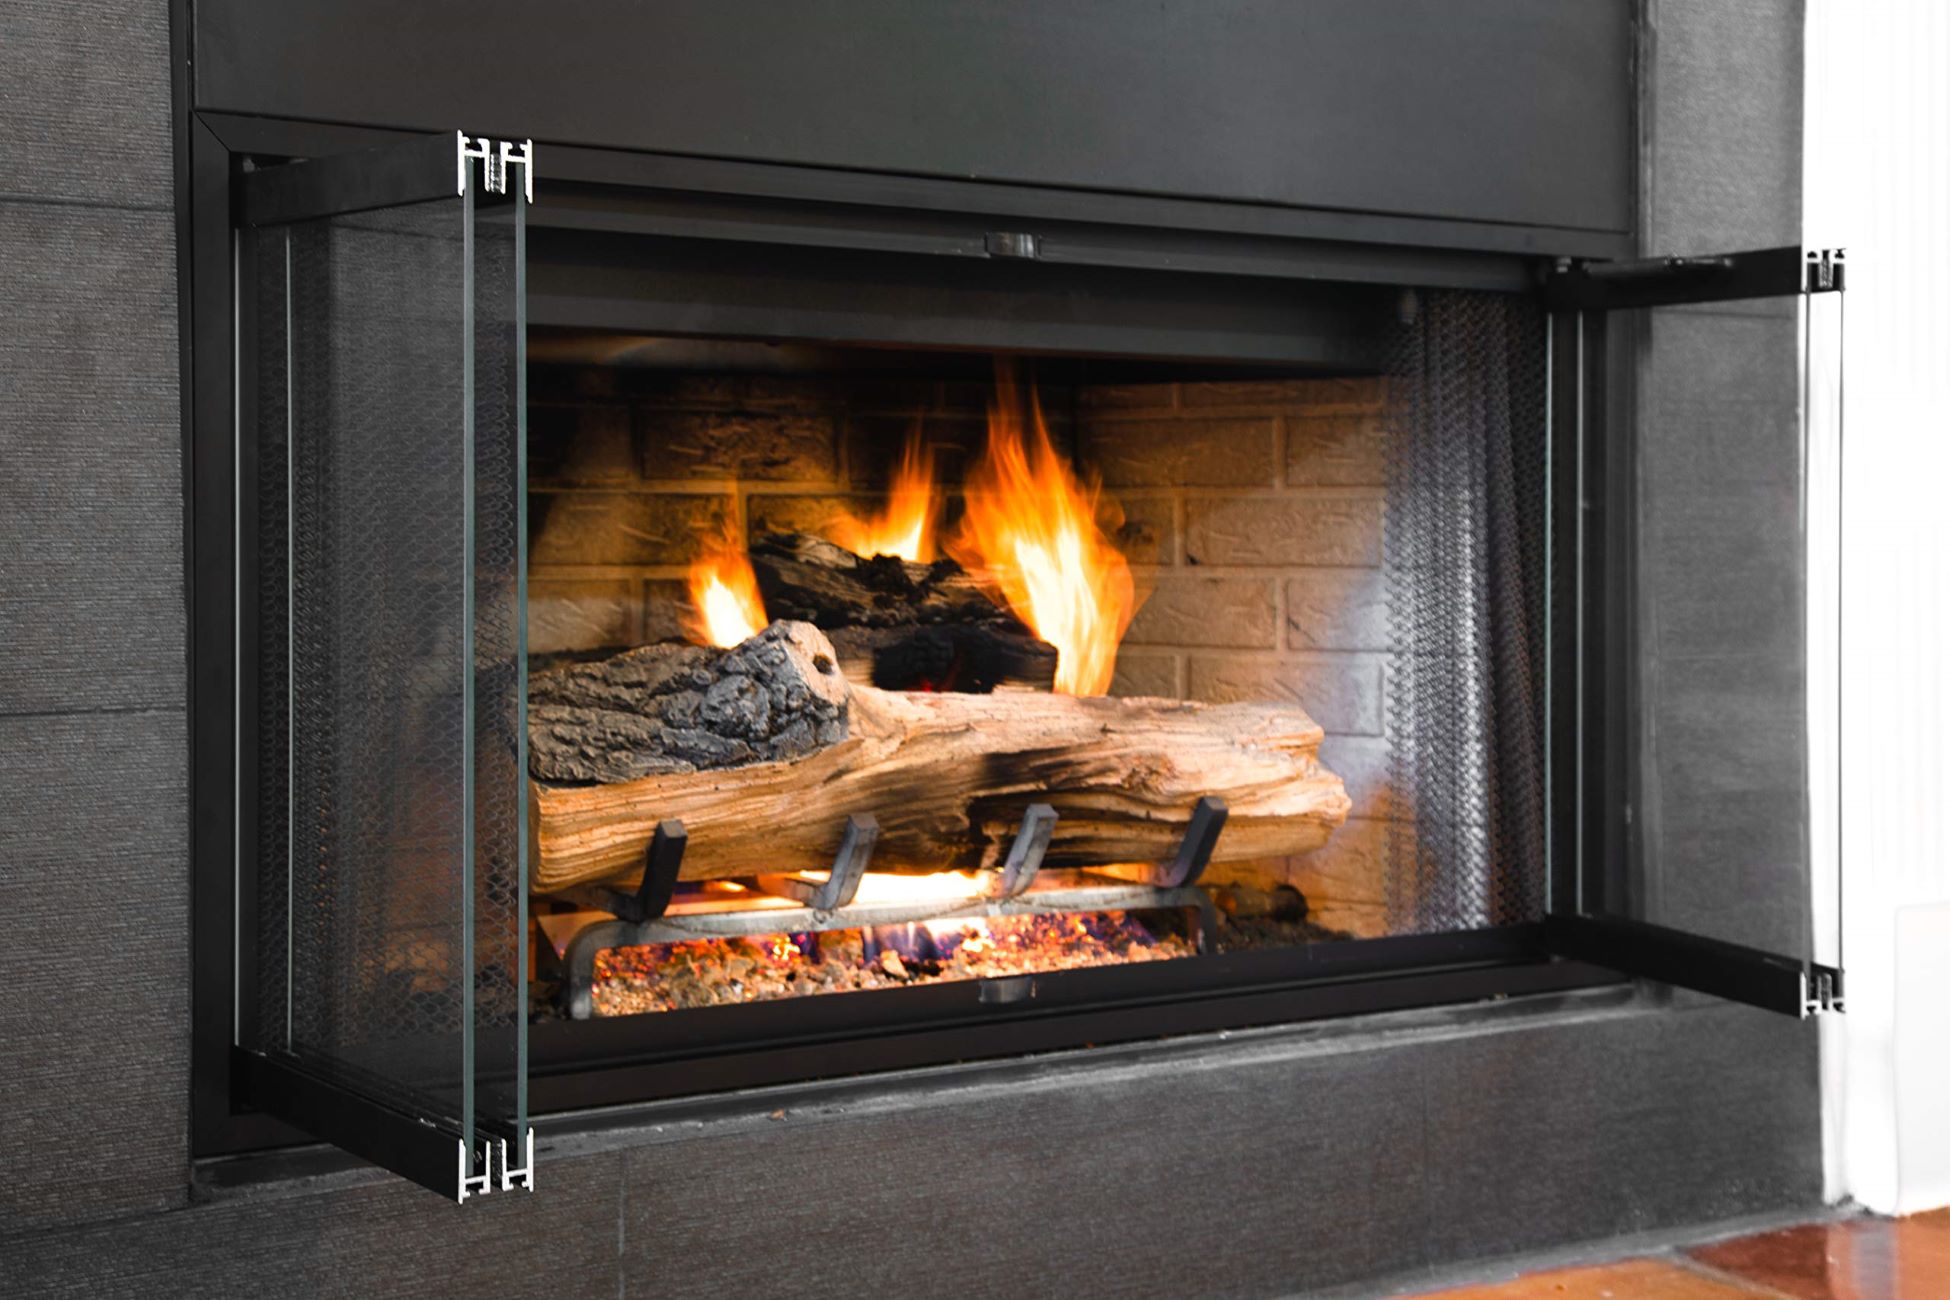 How To Remove Glass Fireplace Doors